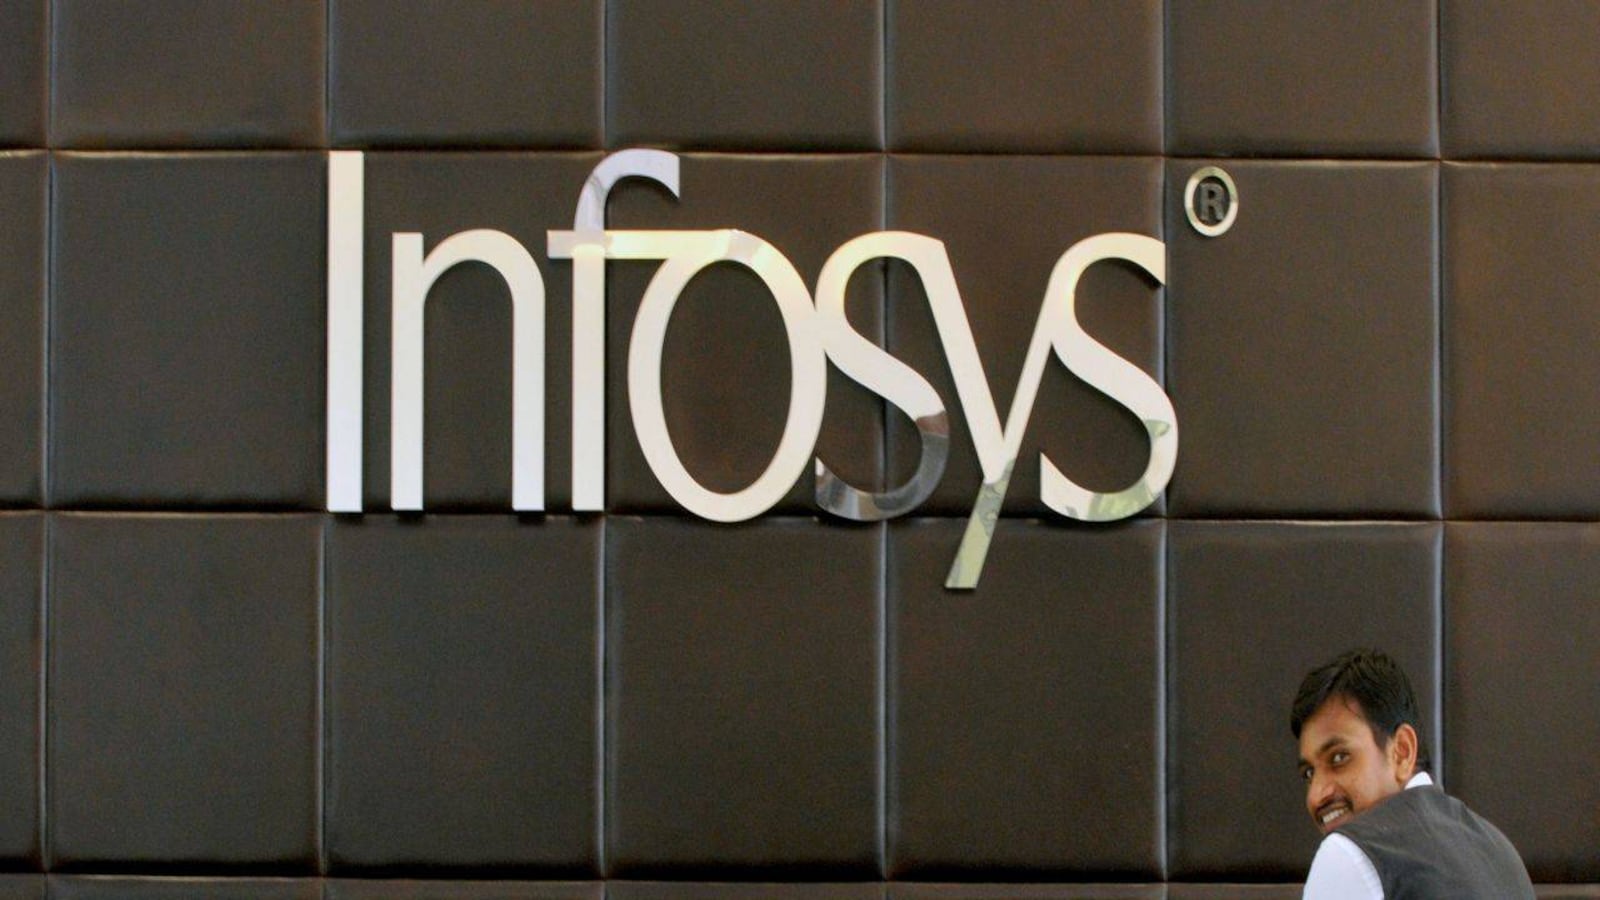 Infosys Q4 profit rises 7.8%. How do brokerages see the stock?